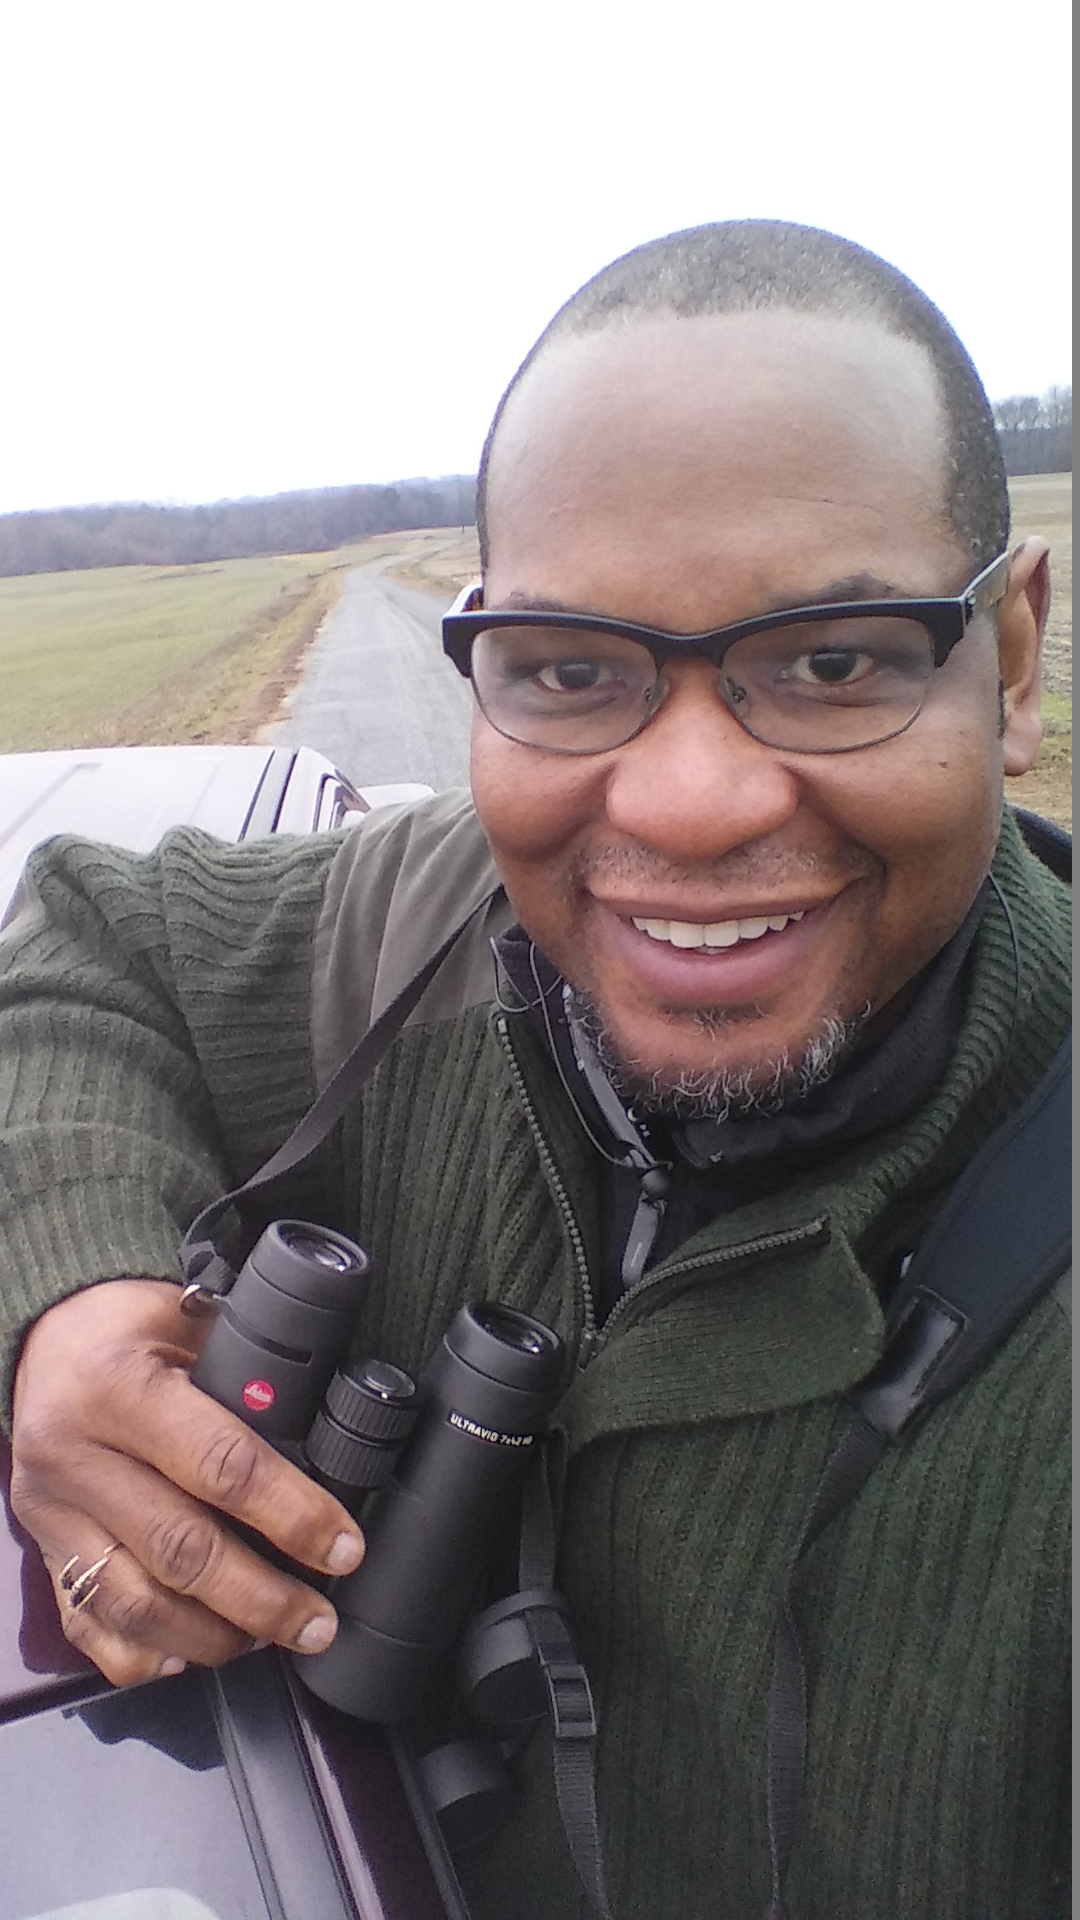 Ecologist on rules for the black birdwatcher